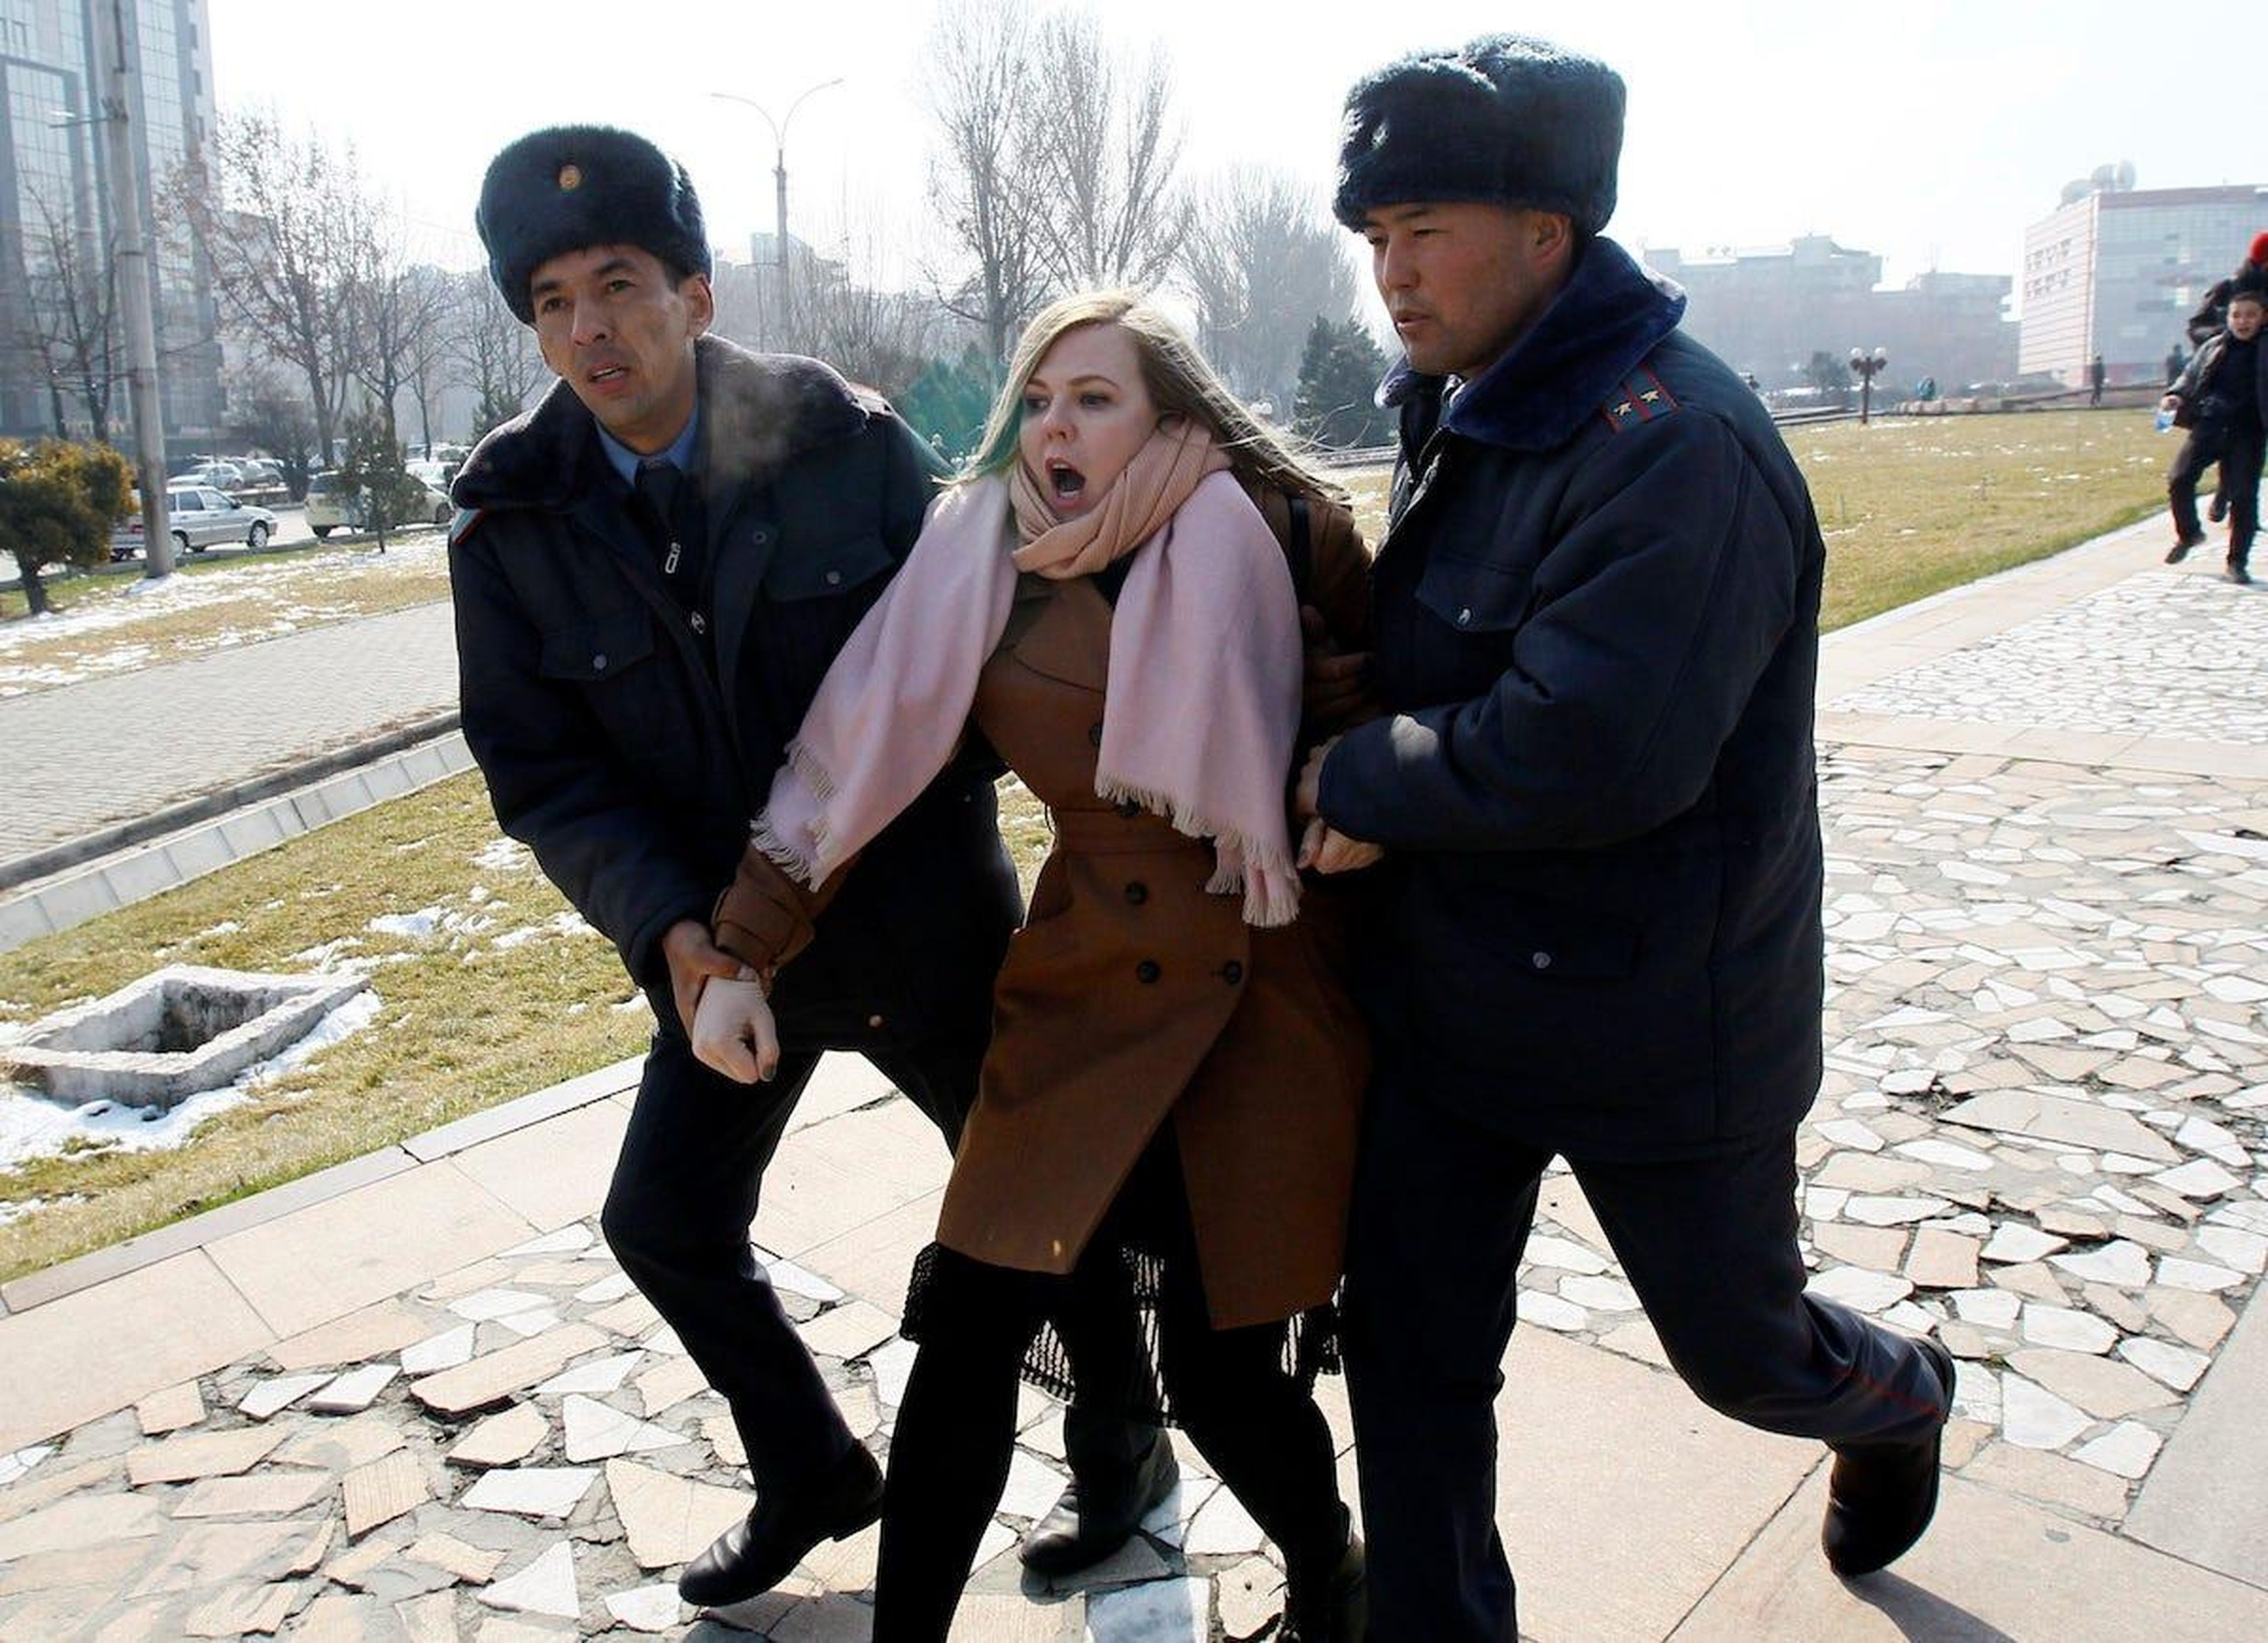 Kyrgyz law enforcement officers detain a women's rights activist during a rally in Bishkek, Kyrgyzstan.